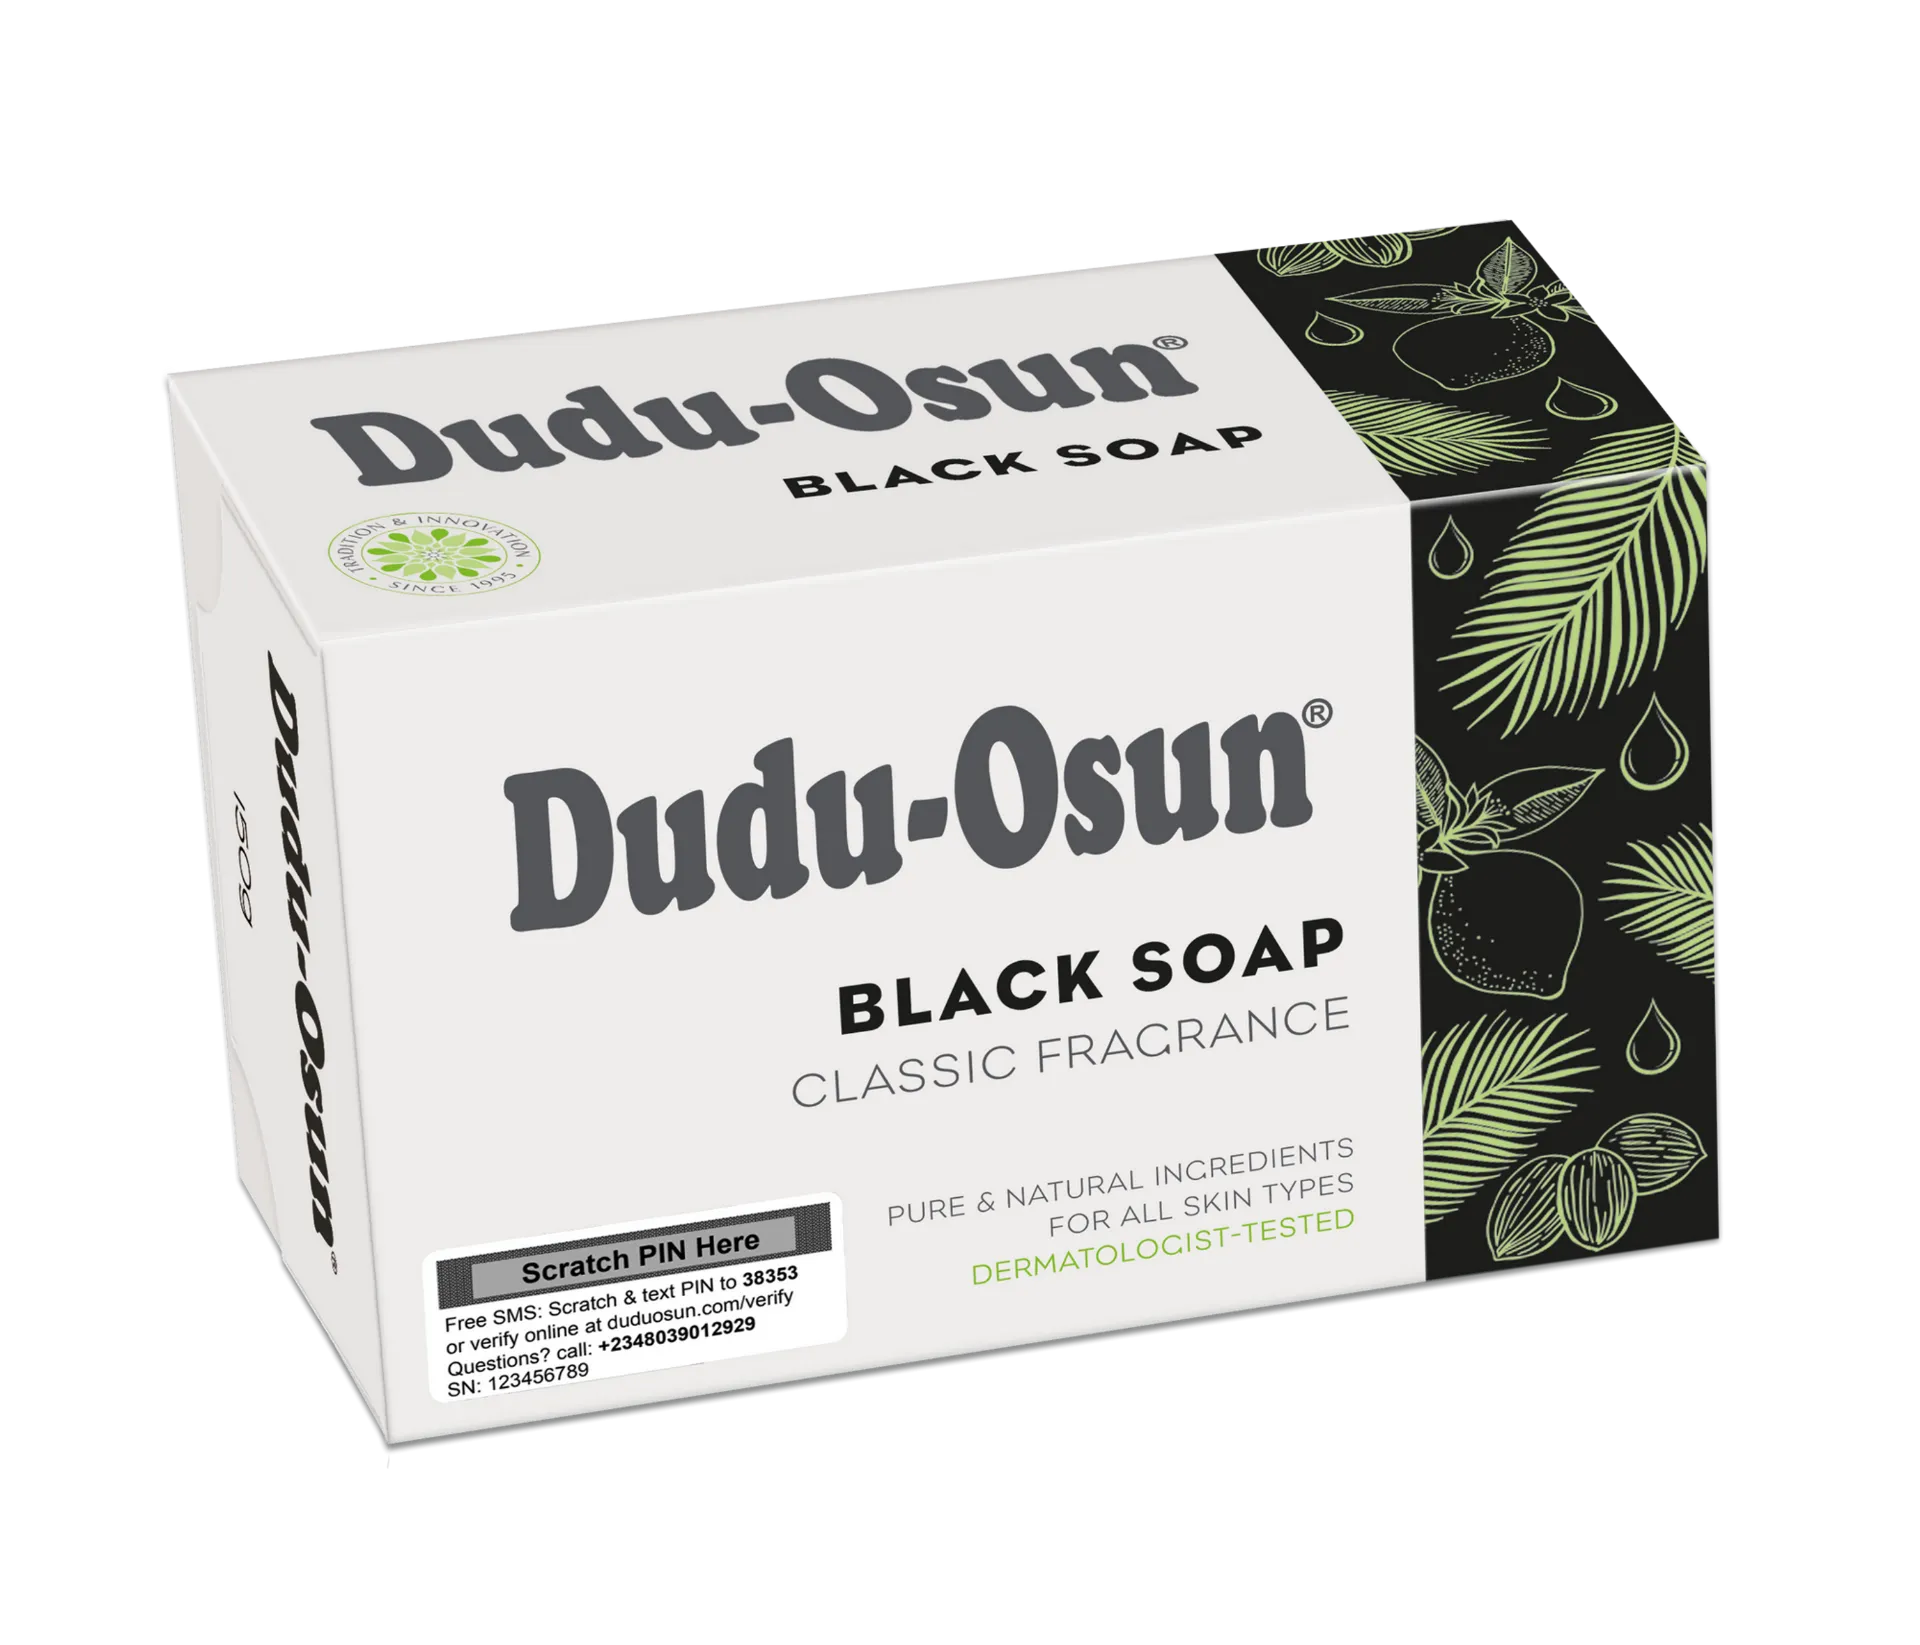 Picture of Dudu Osun Tropical pure natural African black soap 150g Pack of 3